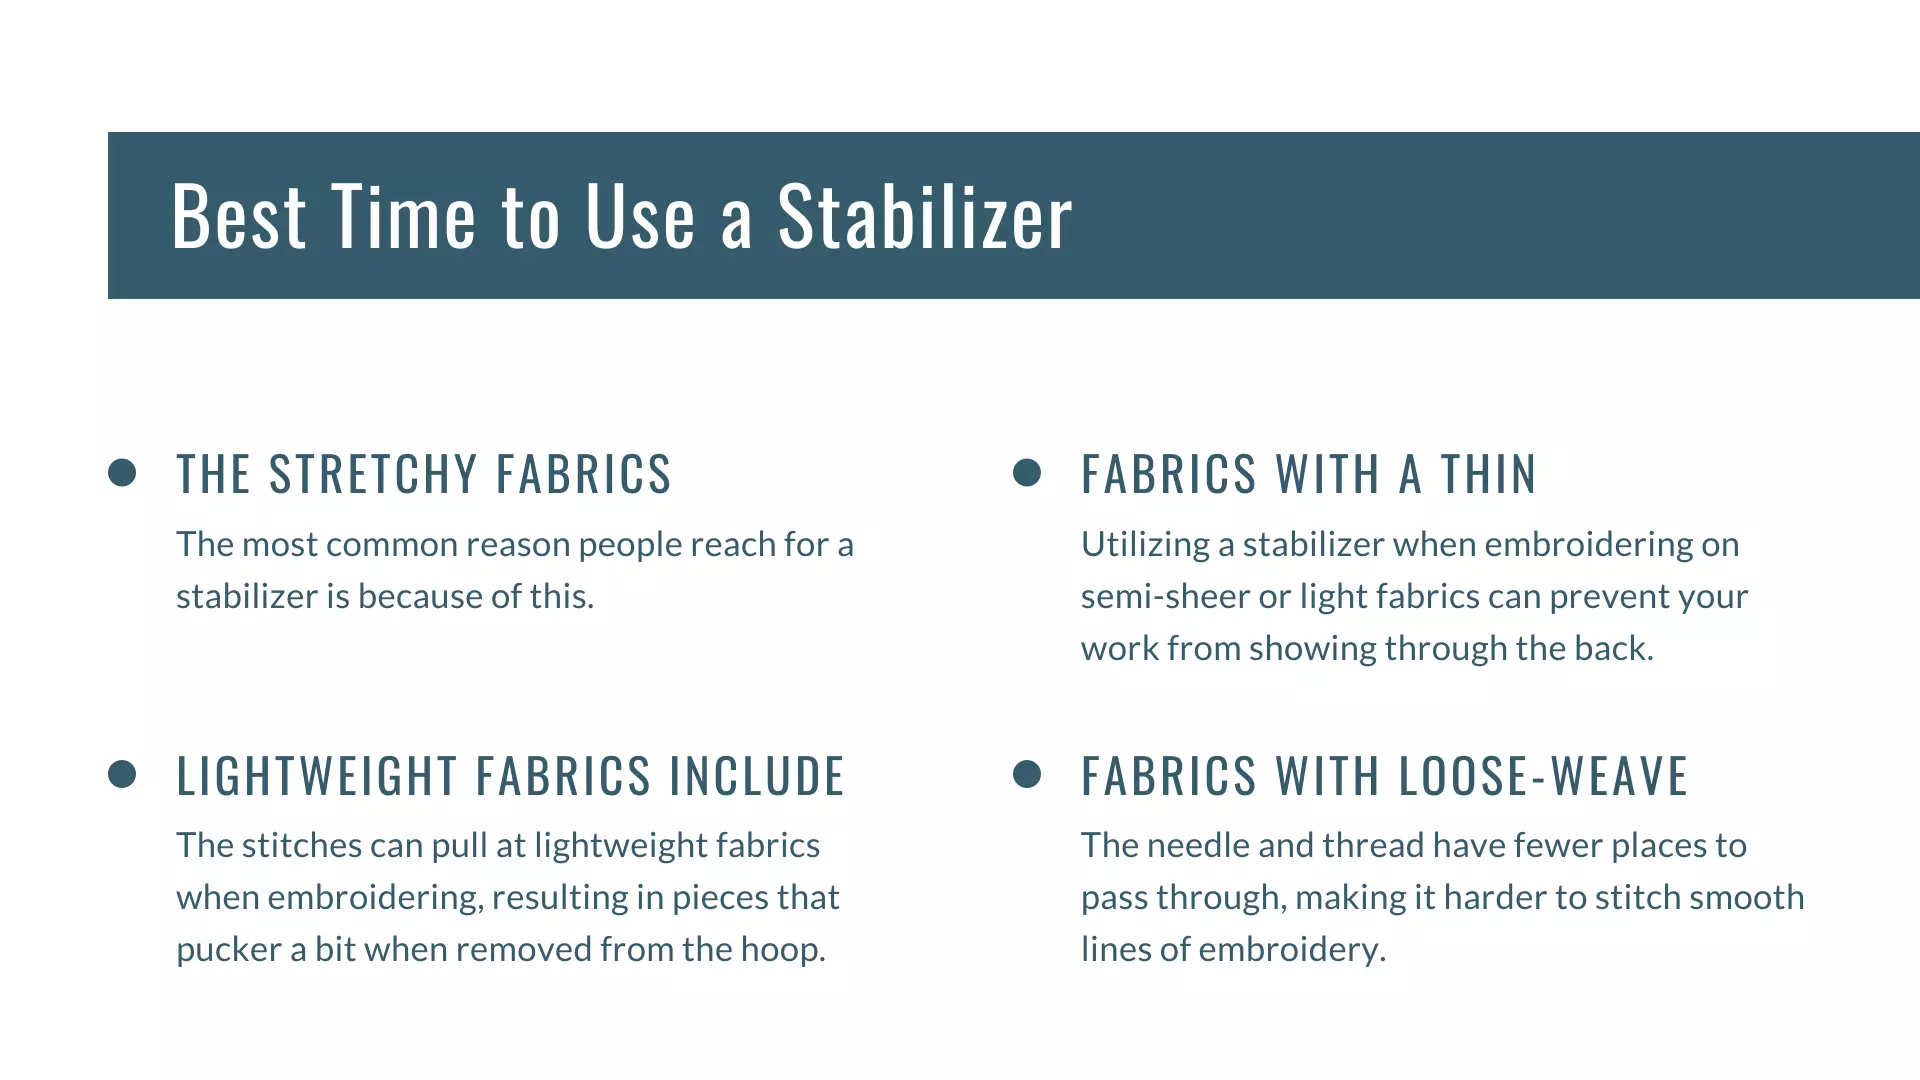 Best Time to Use a Stabilizer